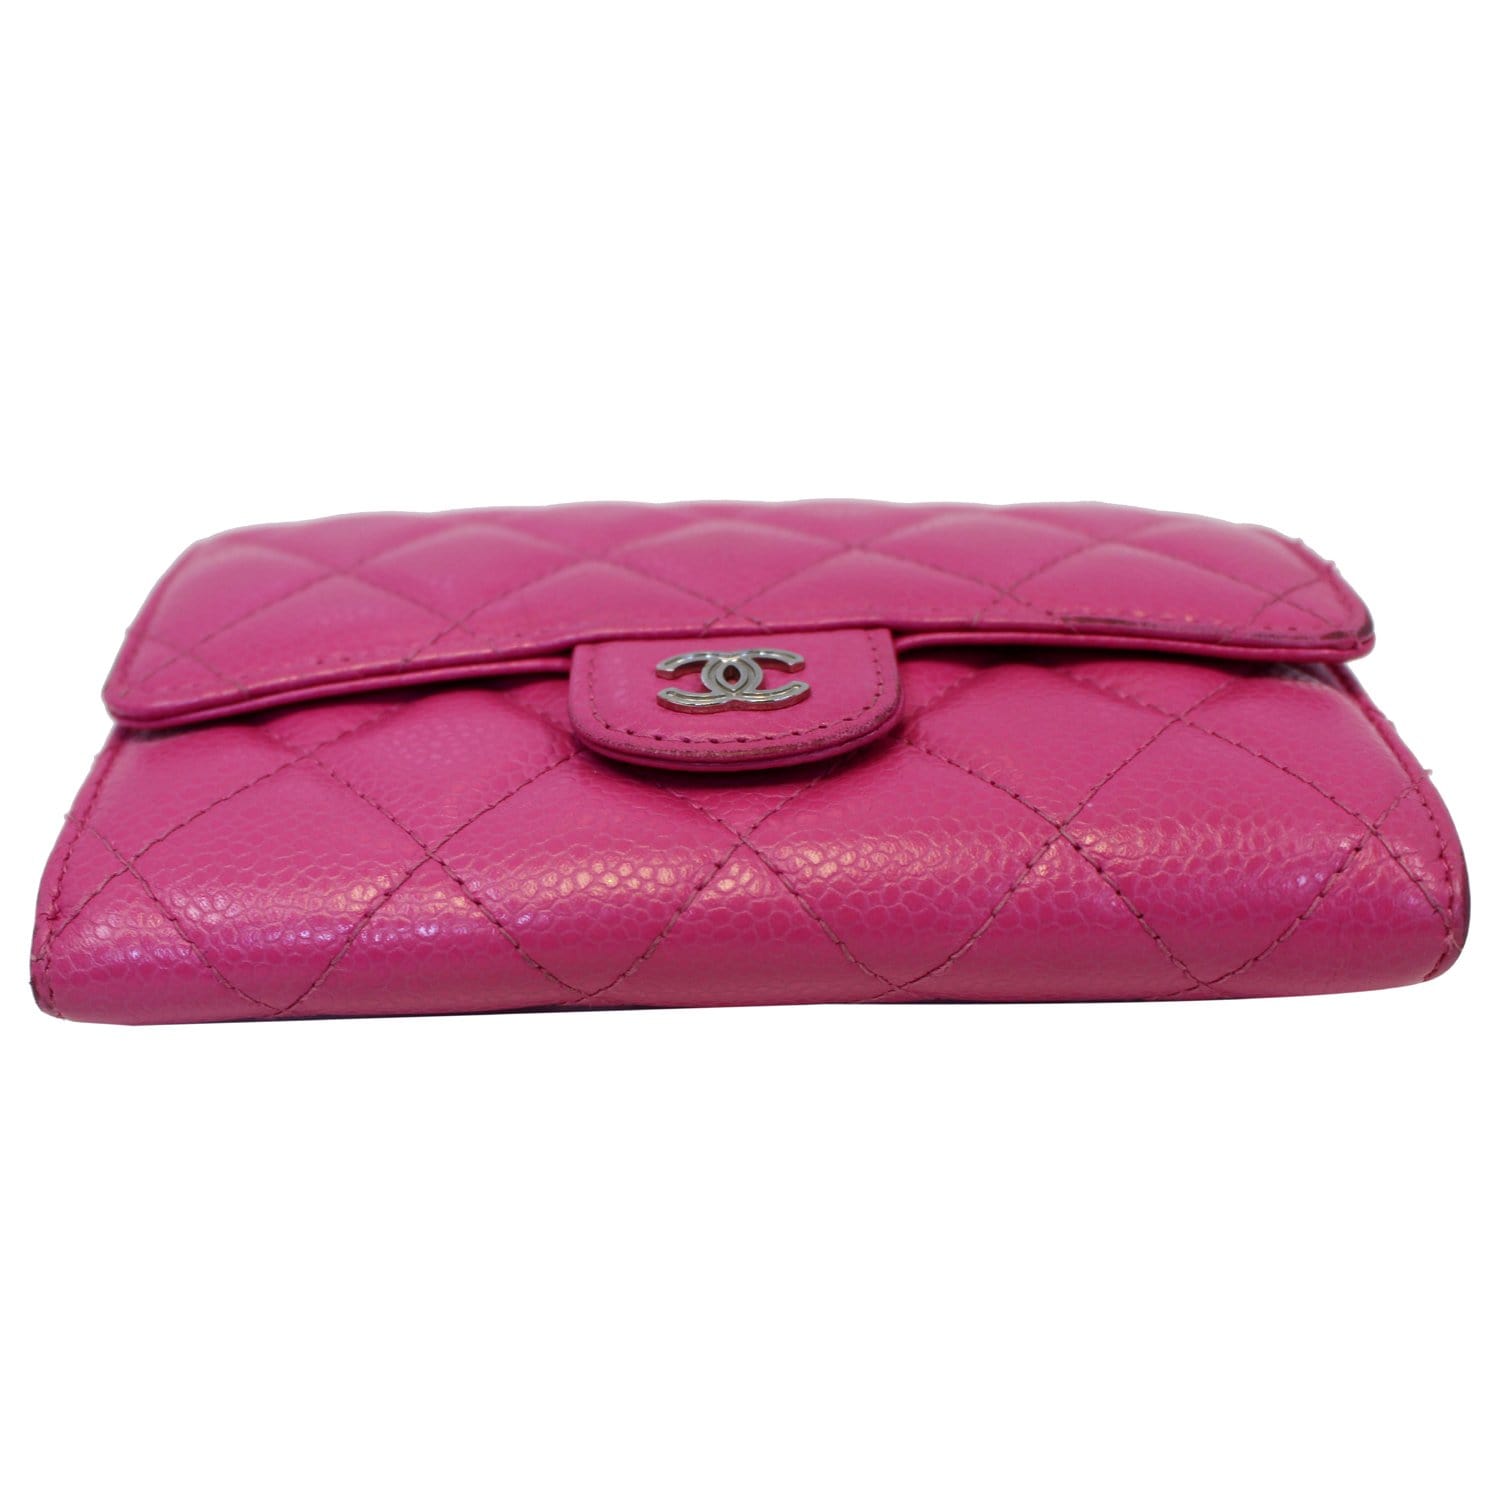 Timeless/classique leather wallet Chanel Pink in Leather - 24489671